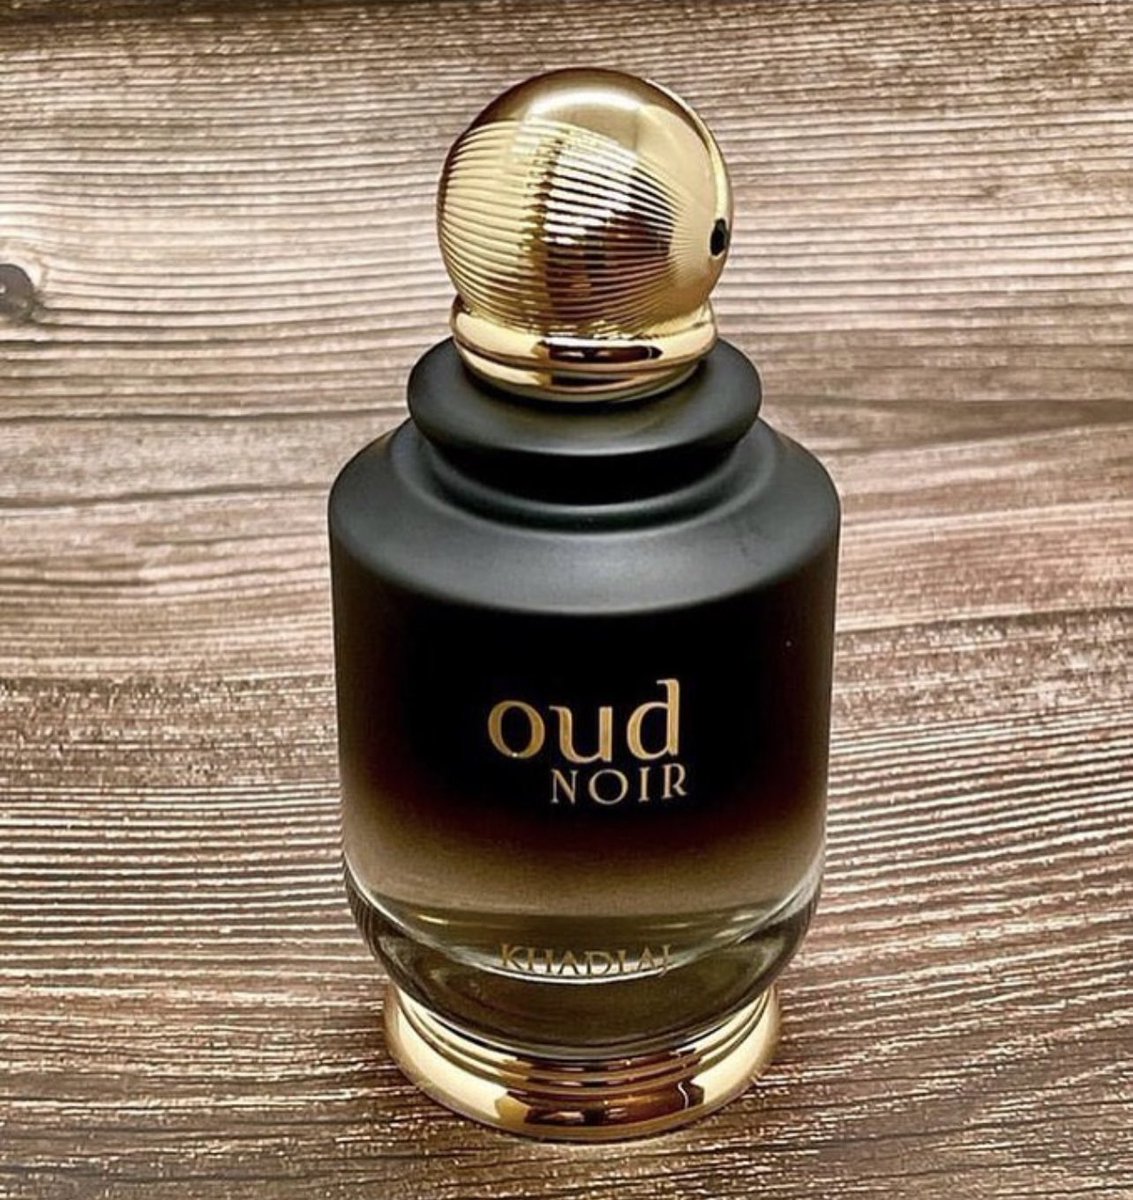 Great choice!

OUD NOIR. Available for 23k only
#AbujaTwitterCommunity